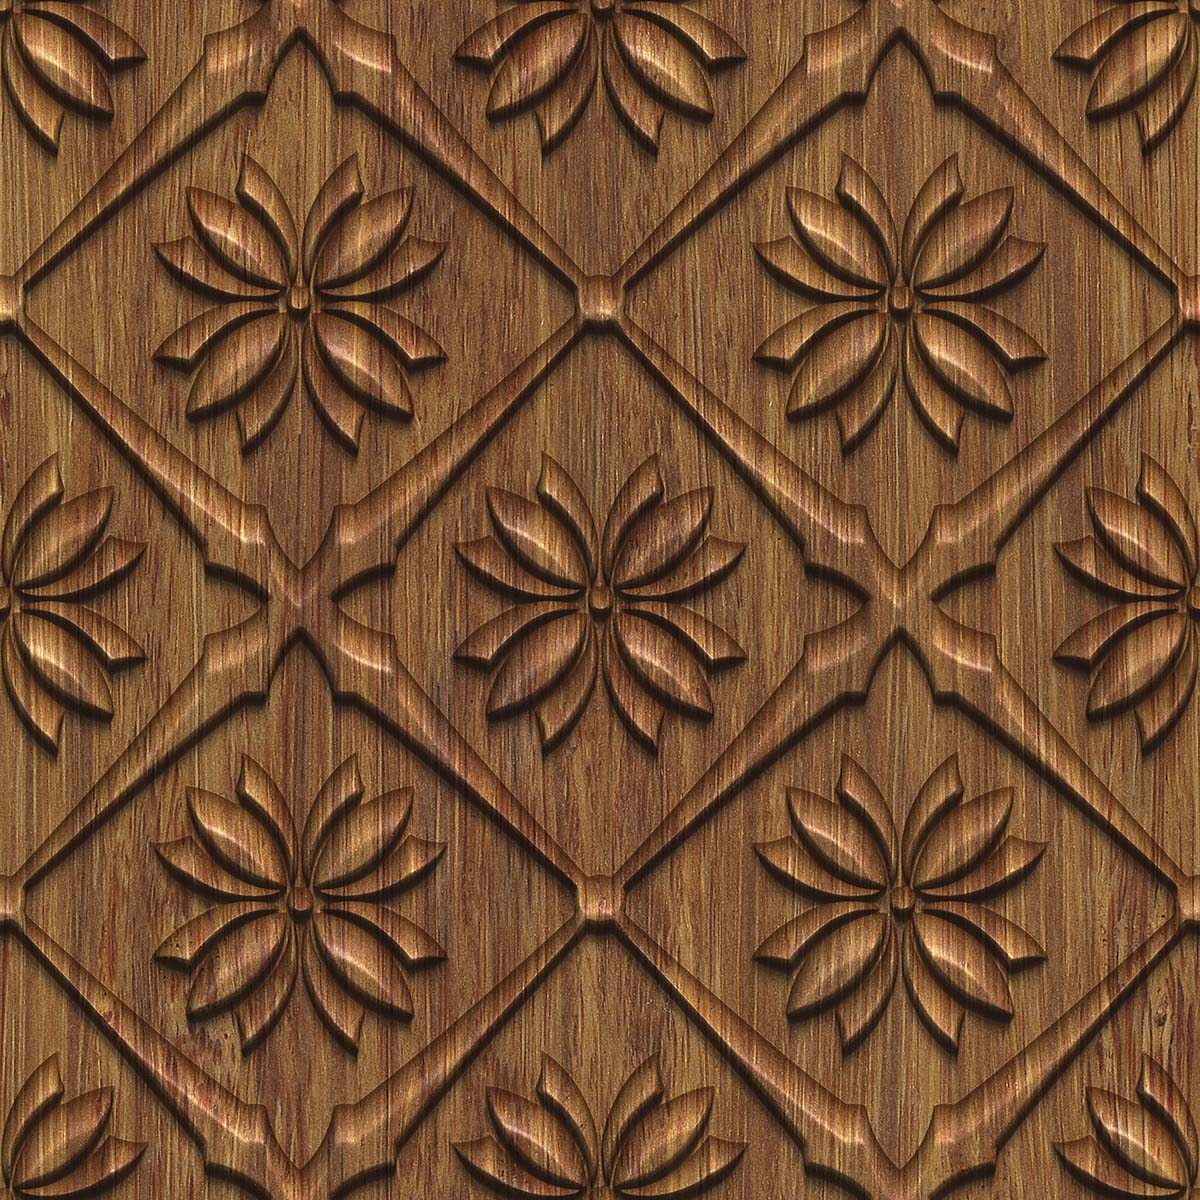 A wood carving with a pattern